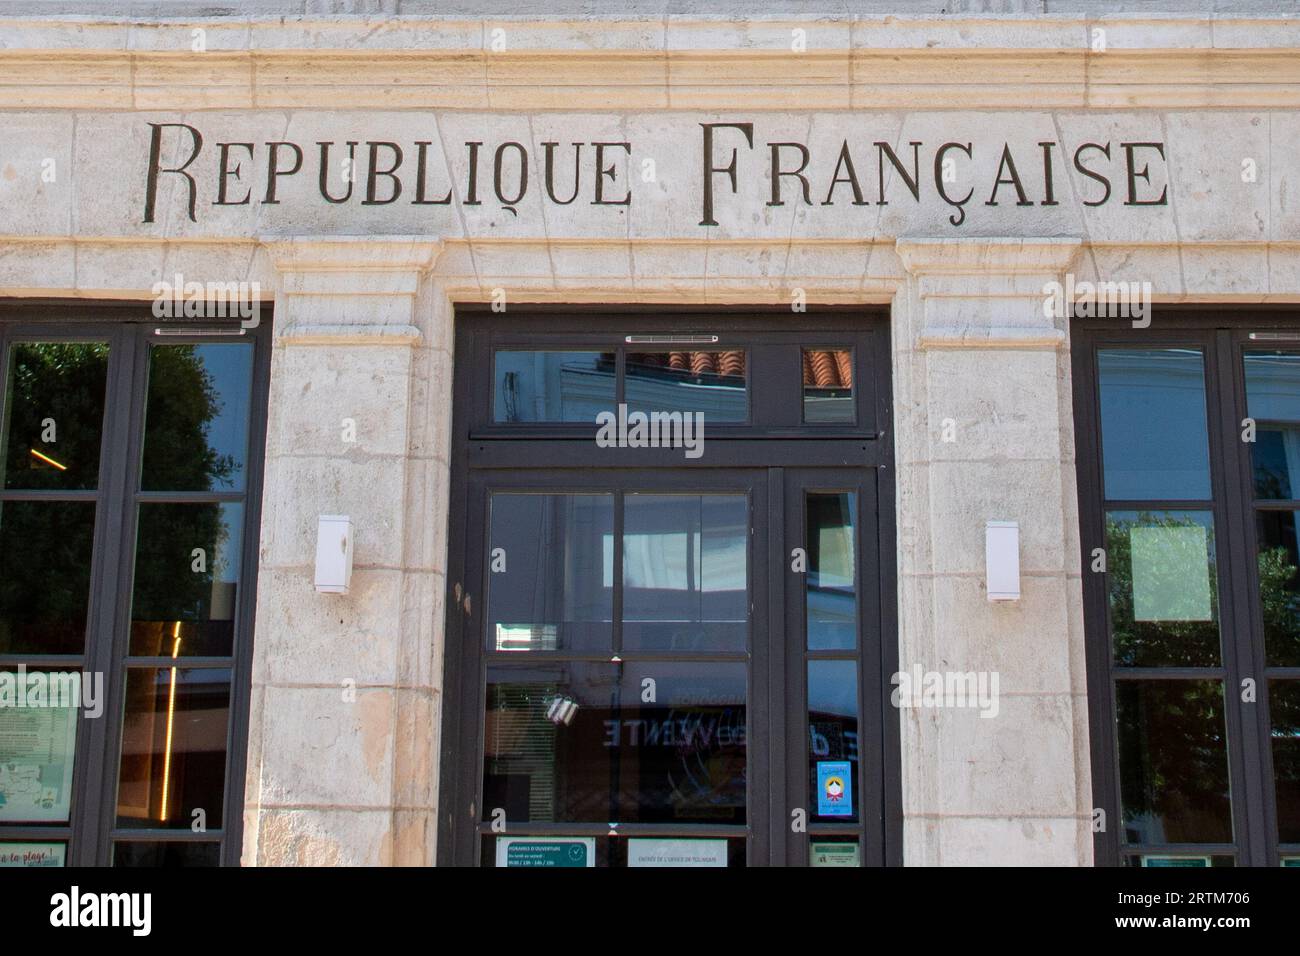 Saint emilion , France -  08 28 2023 : republique francaise text sign in building city hall facade means  French Republic town hall the house mayor in Stock Photo